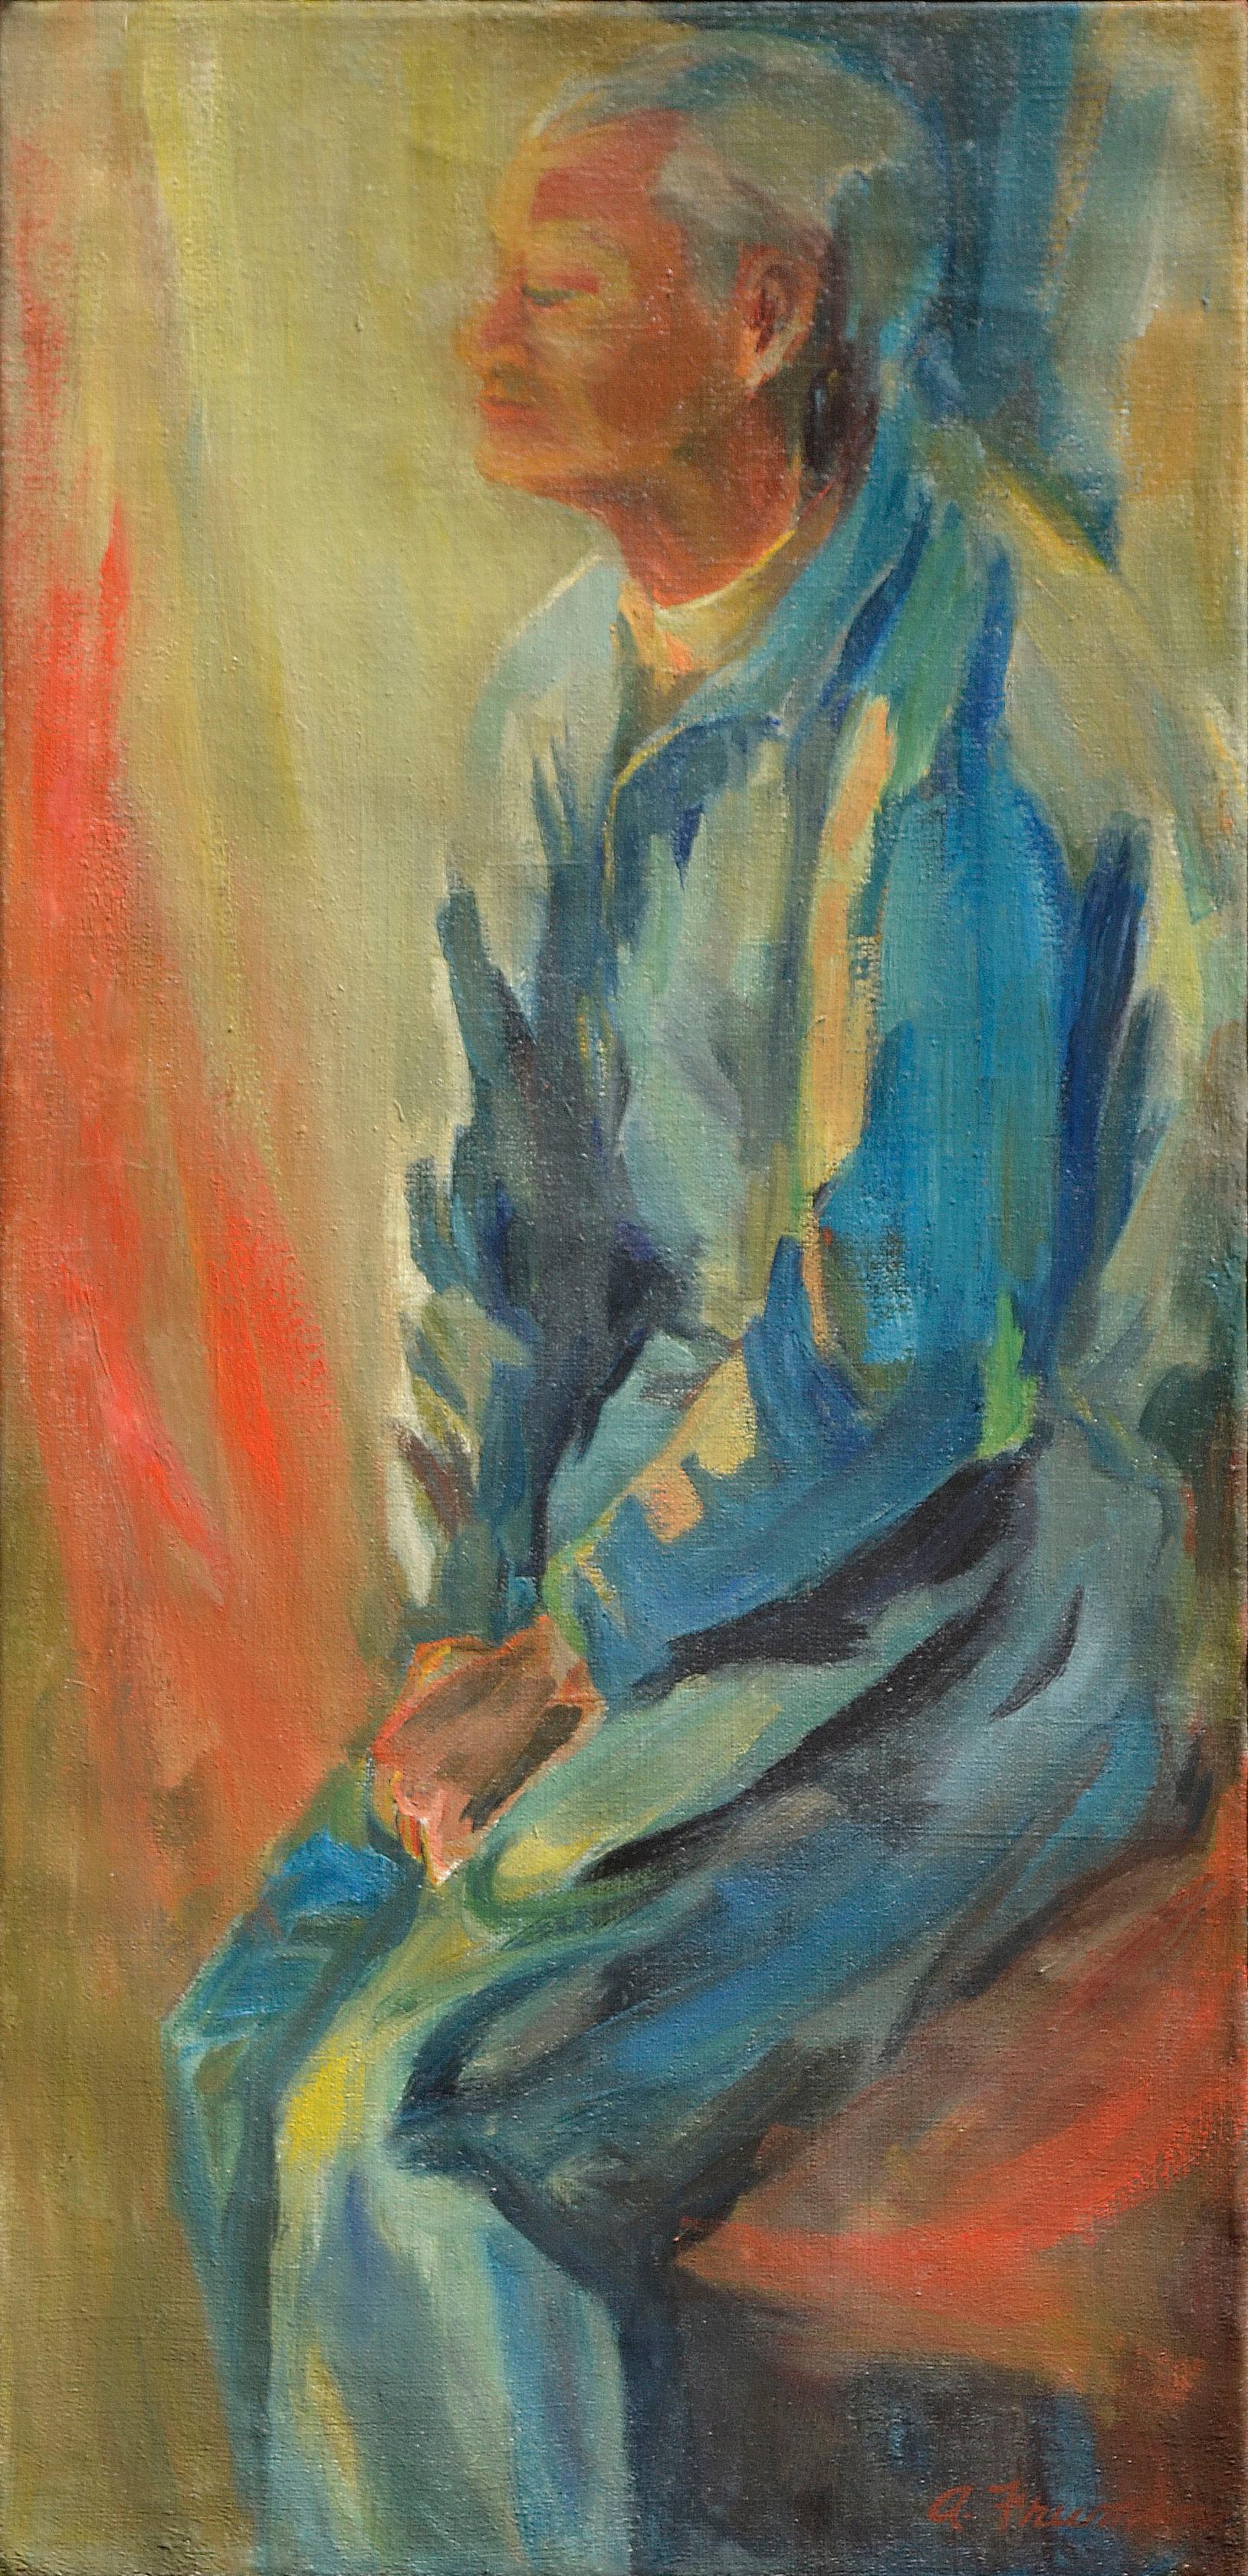 Portrait of a Seated Old Man in Blue - Colorful Expressionist Figurative  - Painting by Annette Freeman